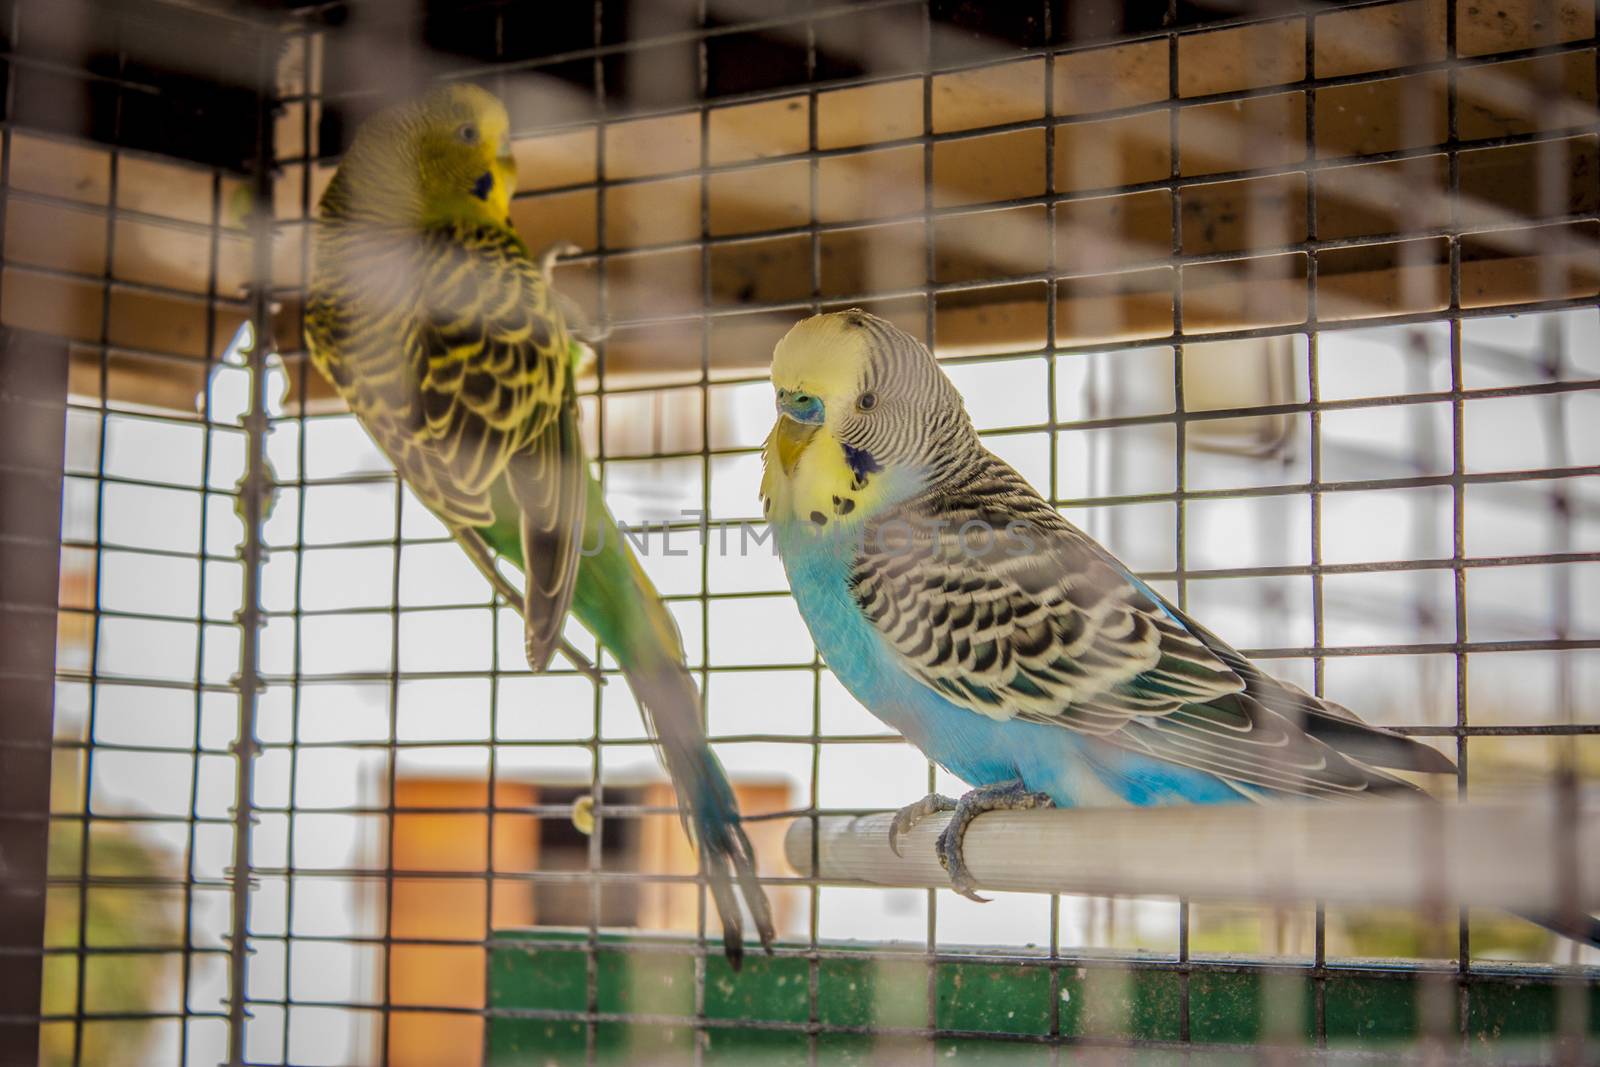 Small caged birds raised in captivity. A life away from nature, in a cage alone.